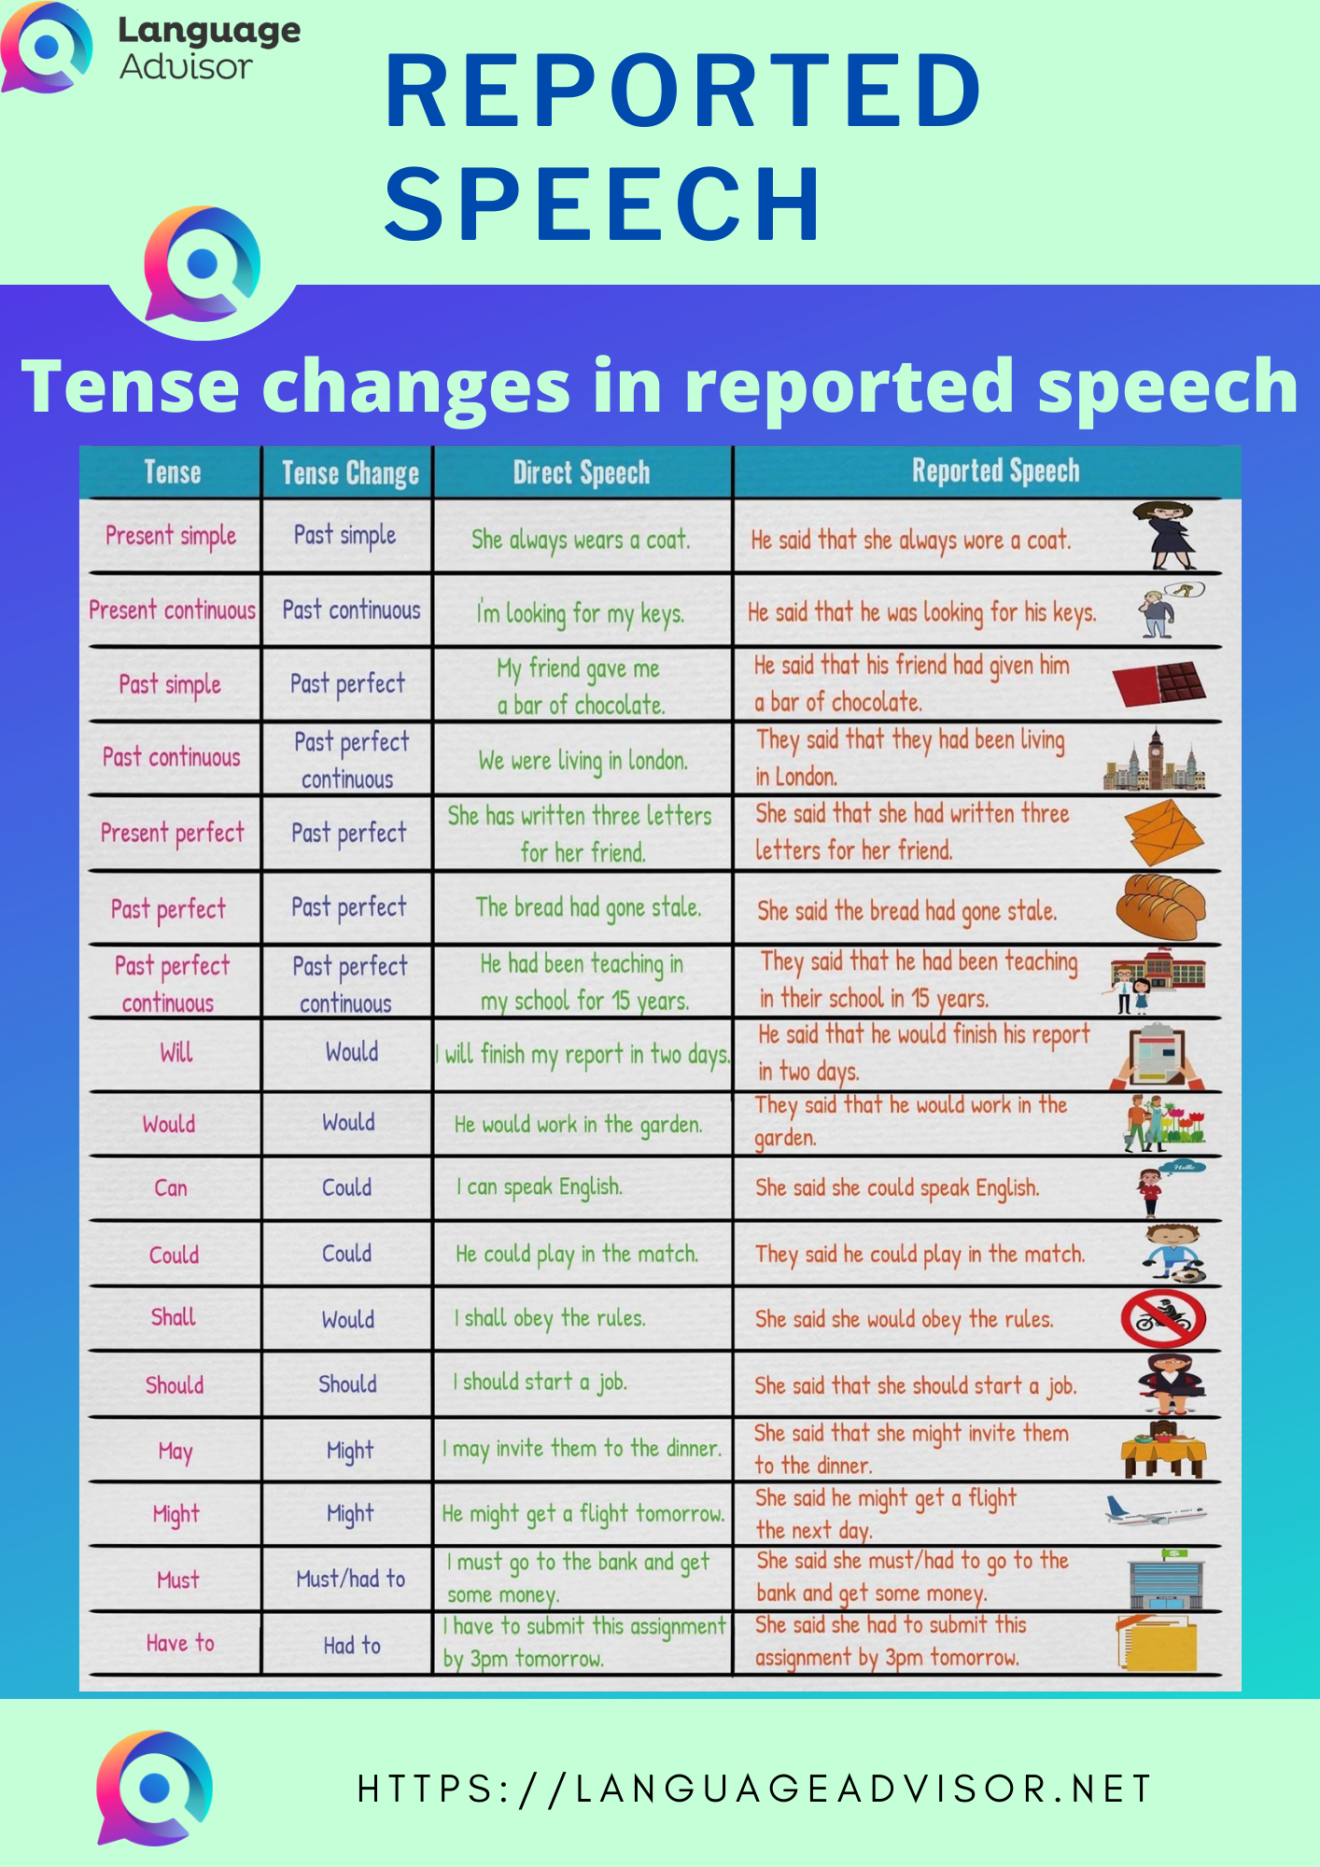 this year in reported speech